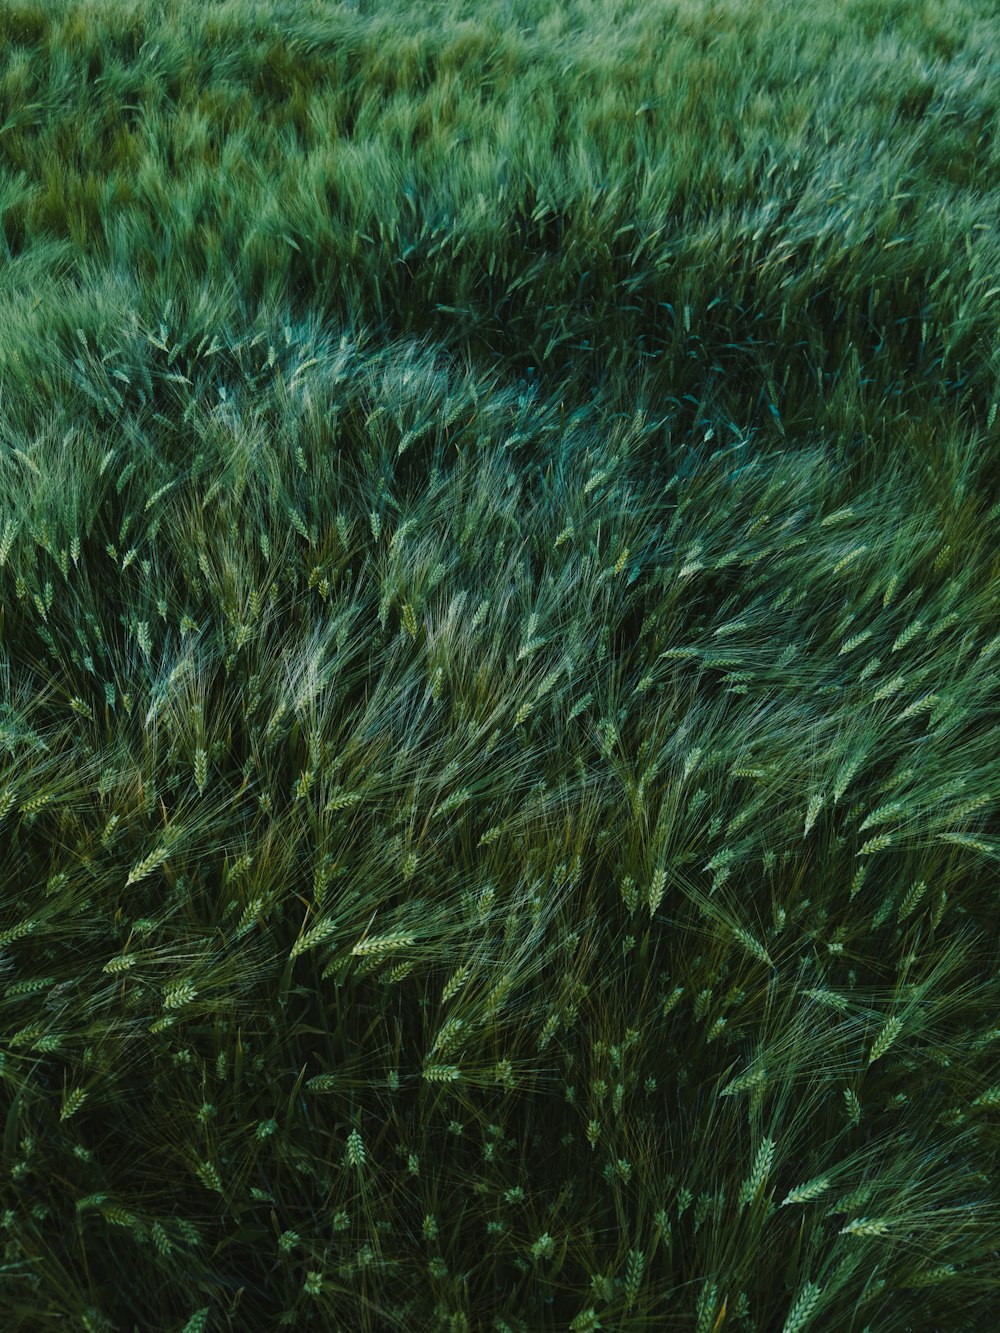 a bunch of grass that is blowing in the wind